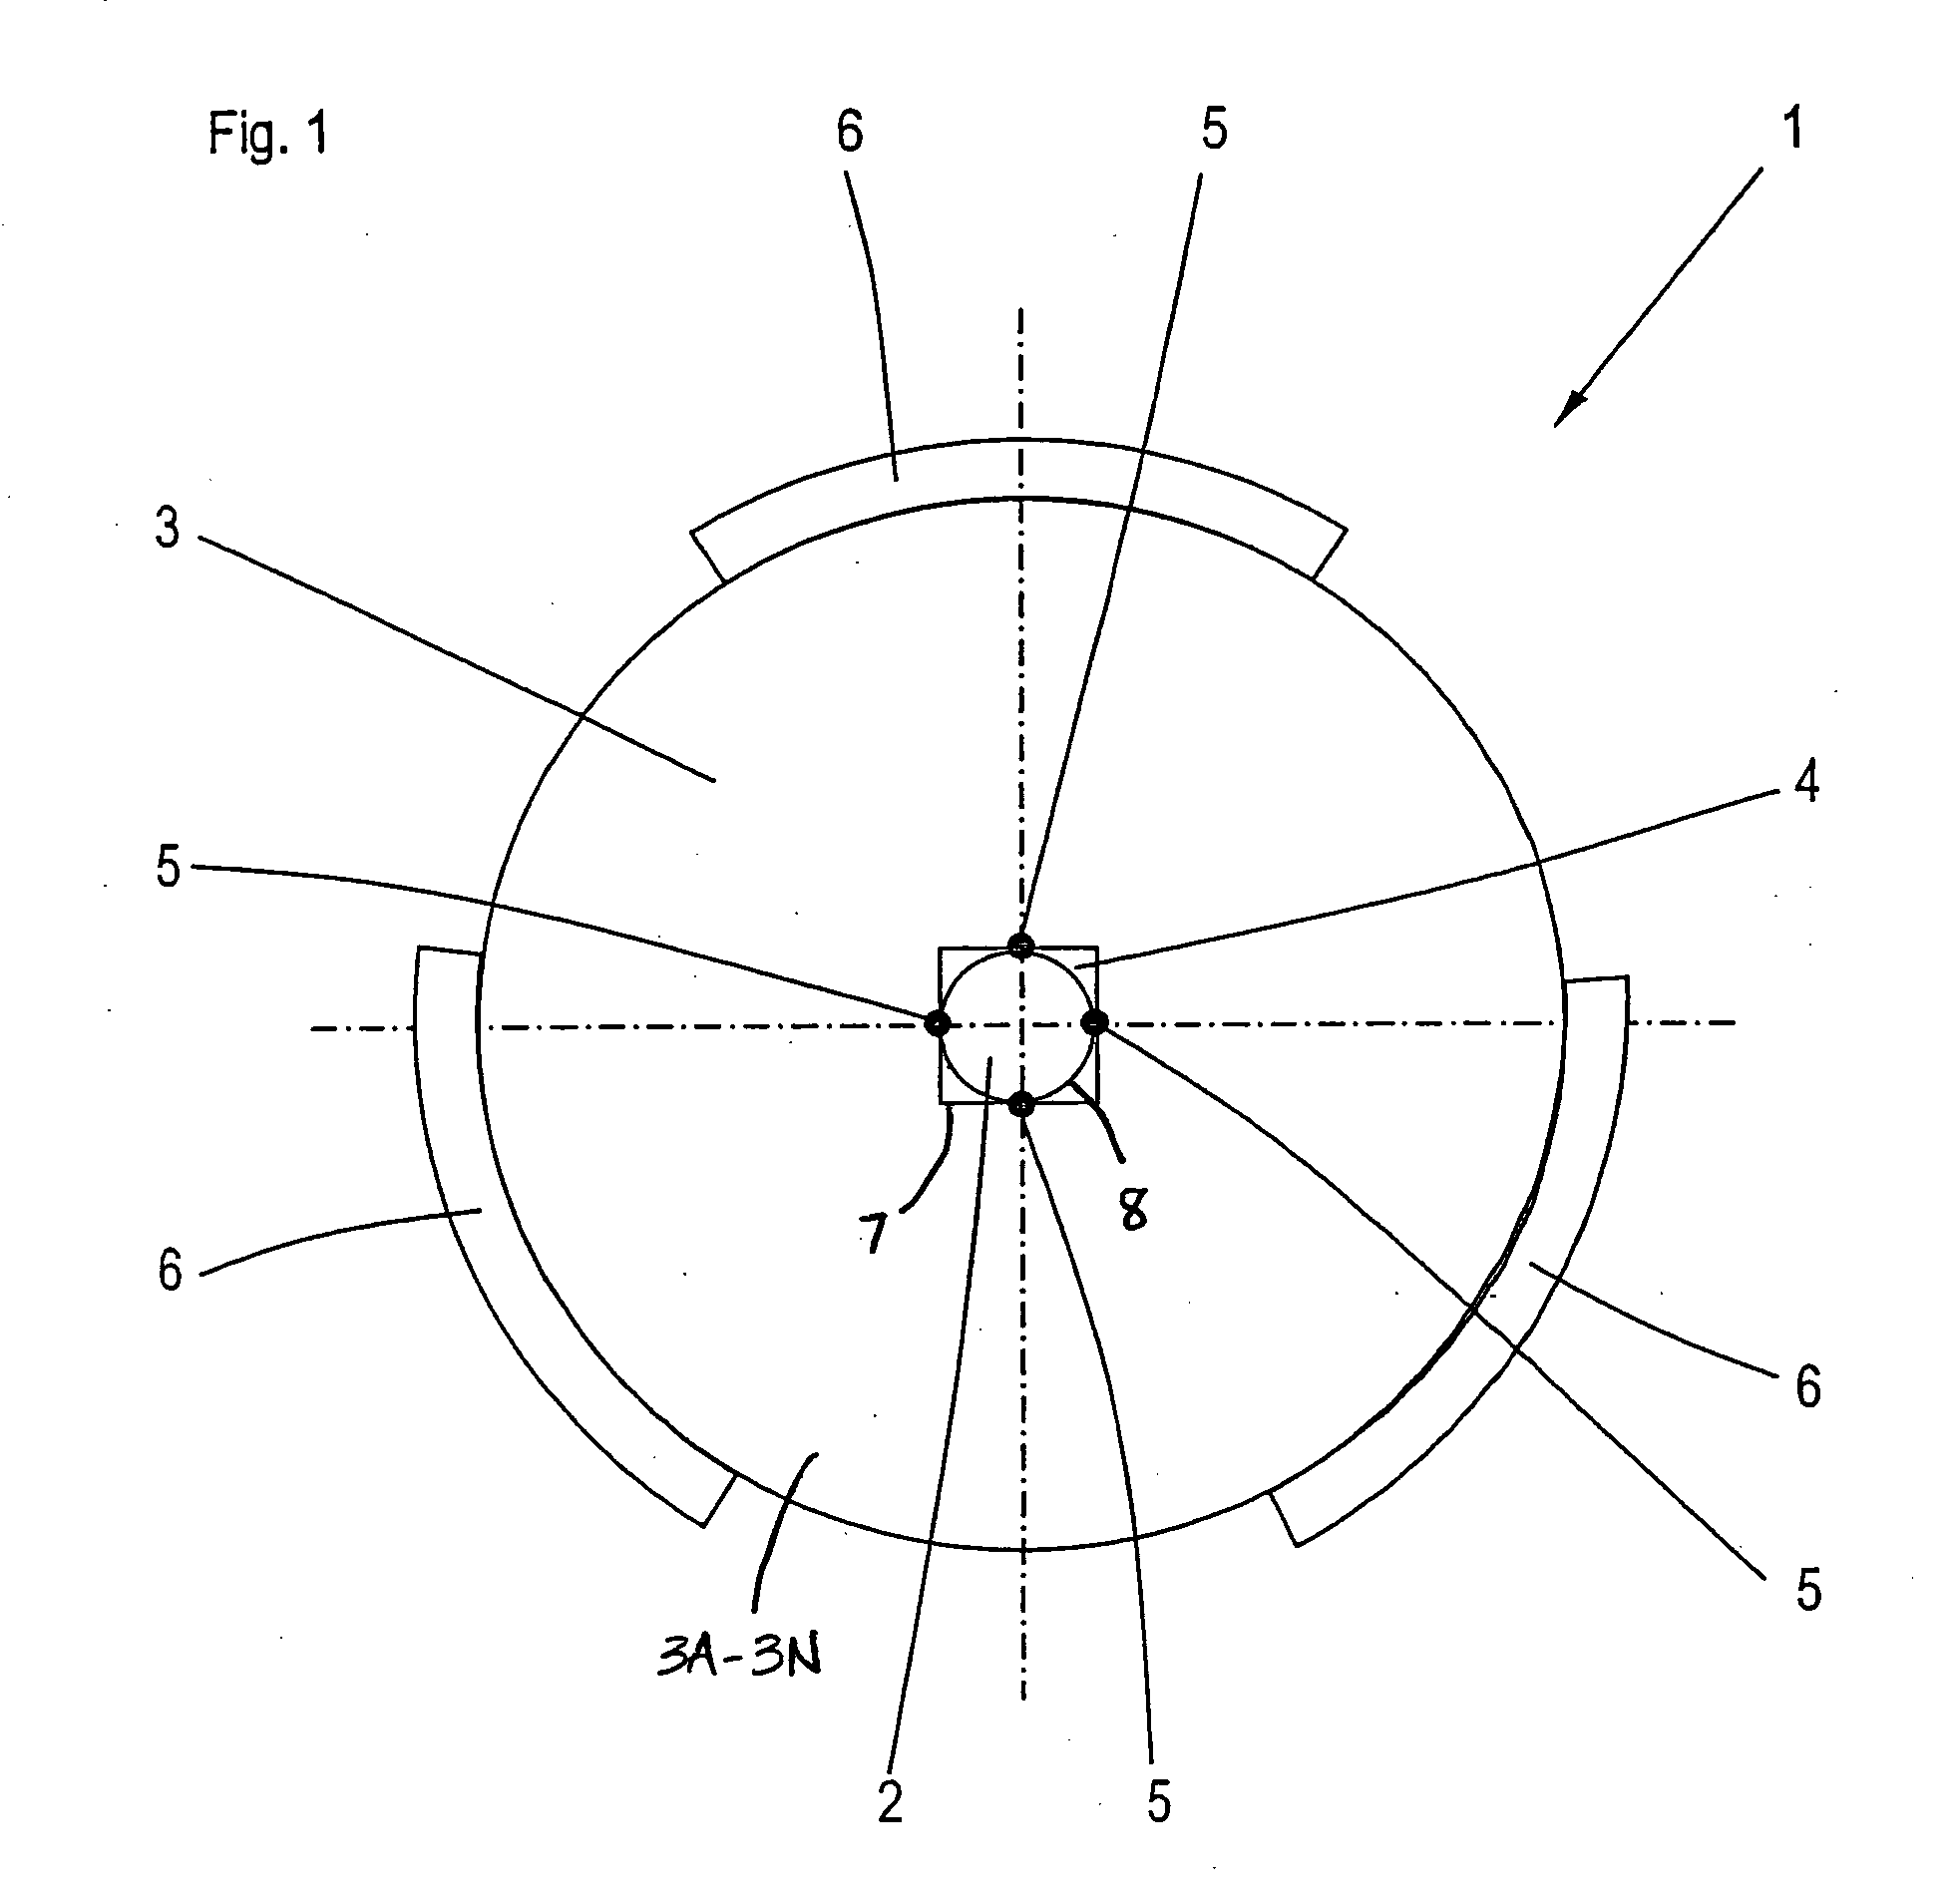 Rotor construction in an electric motor